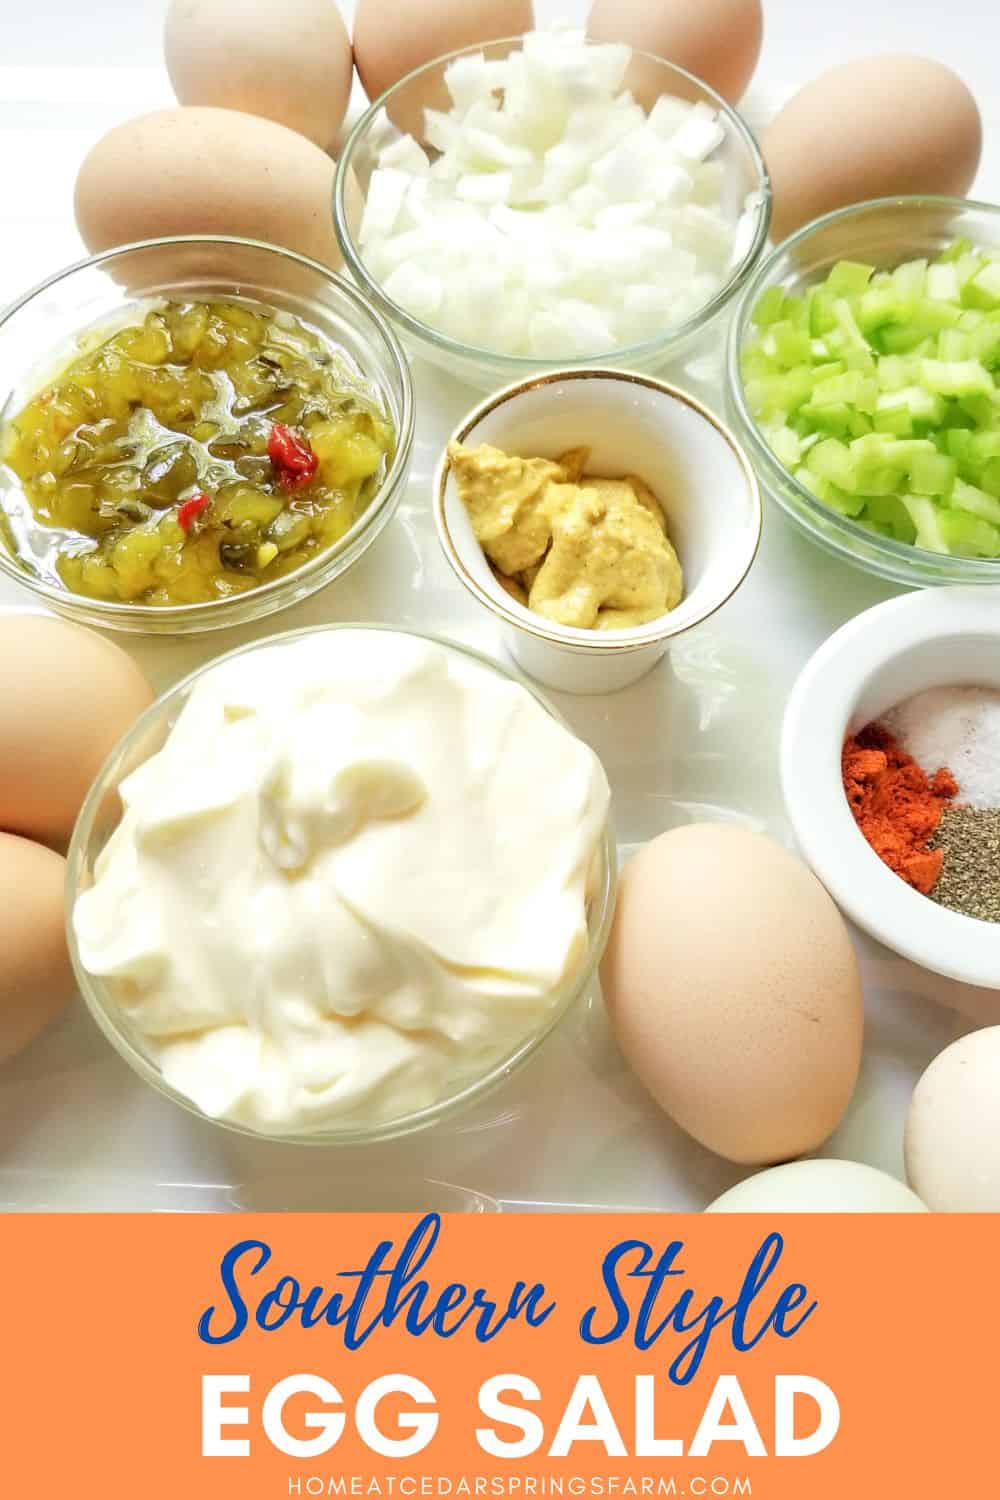 Ingredients for Southern Style Egg Salad with text overlay.